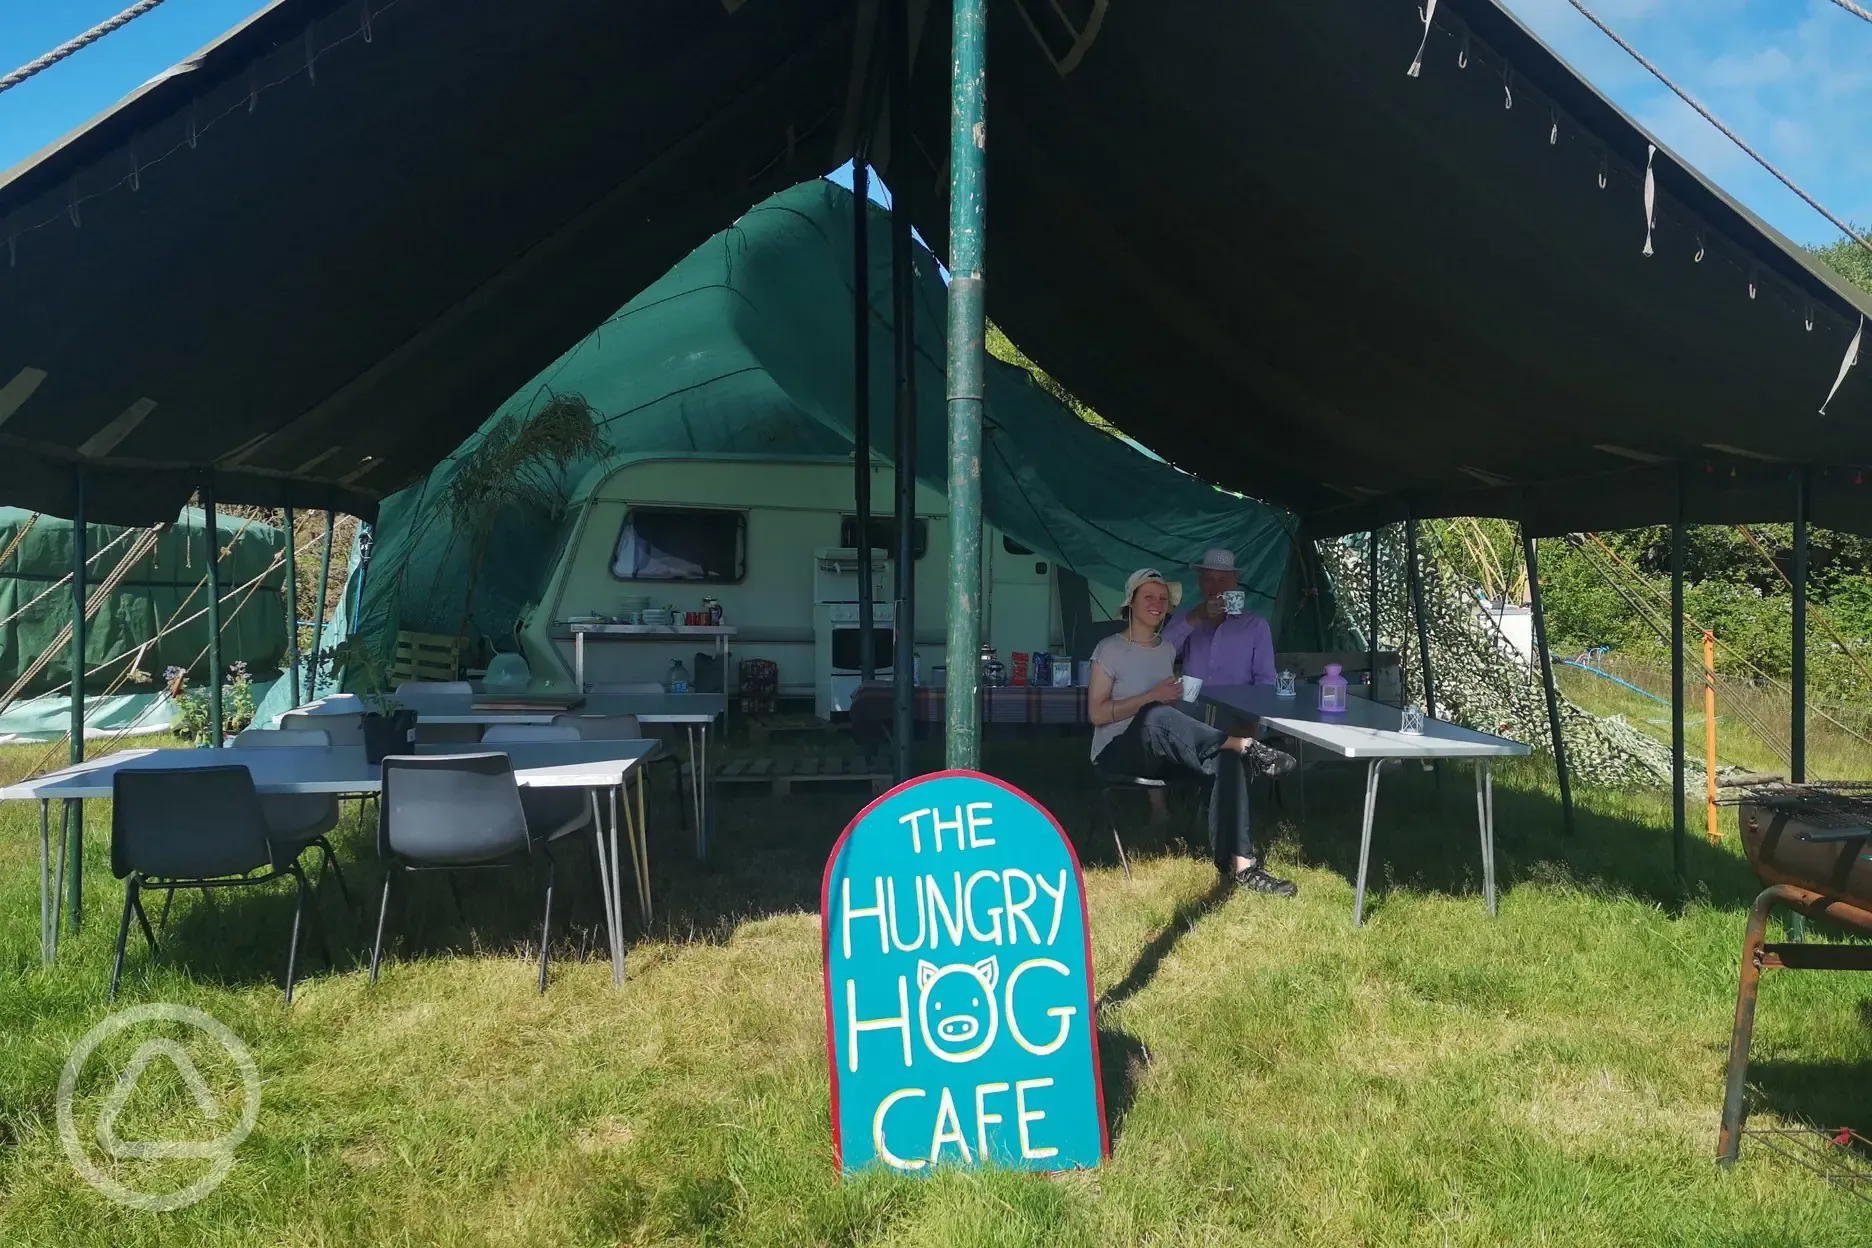 Hungry hog cafe, serving meals and refreshments daily. 